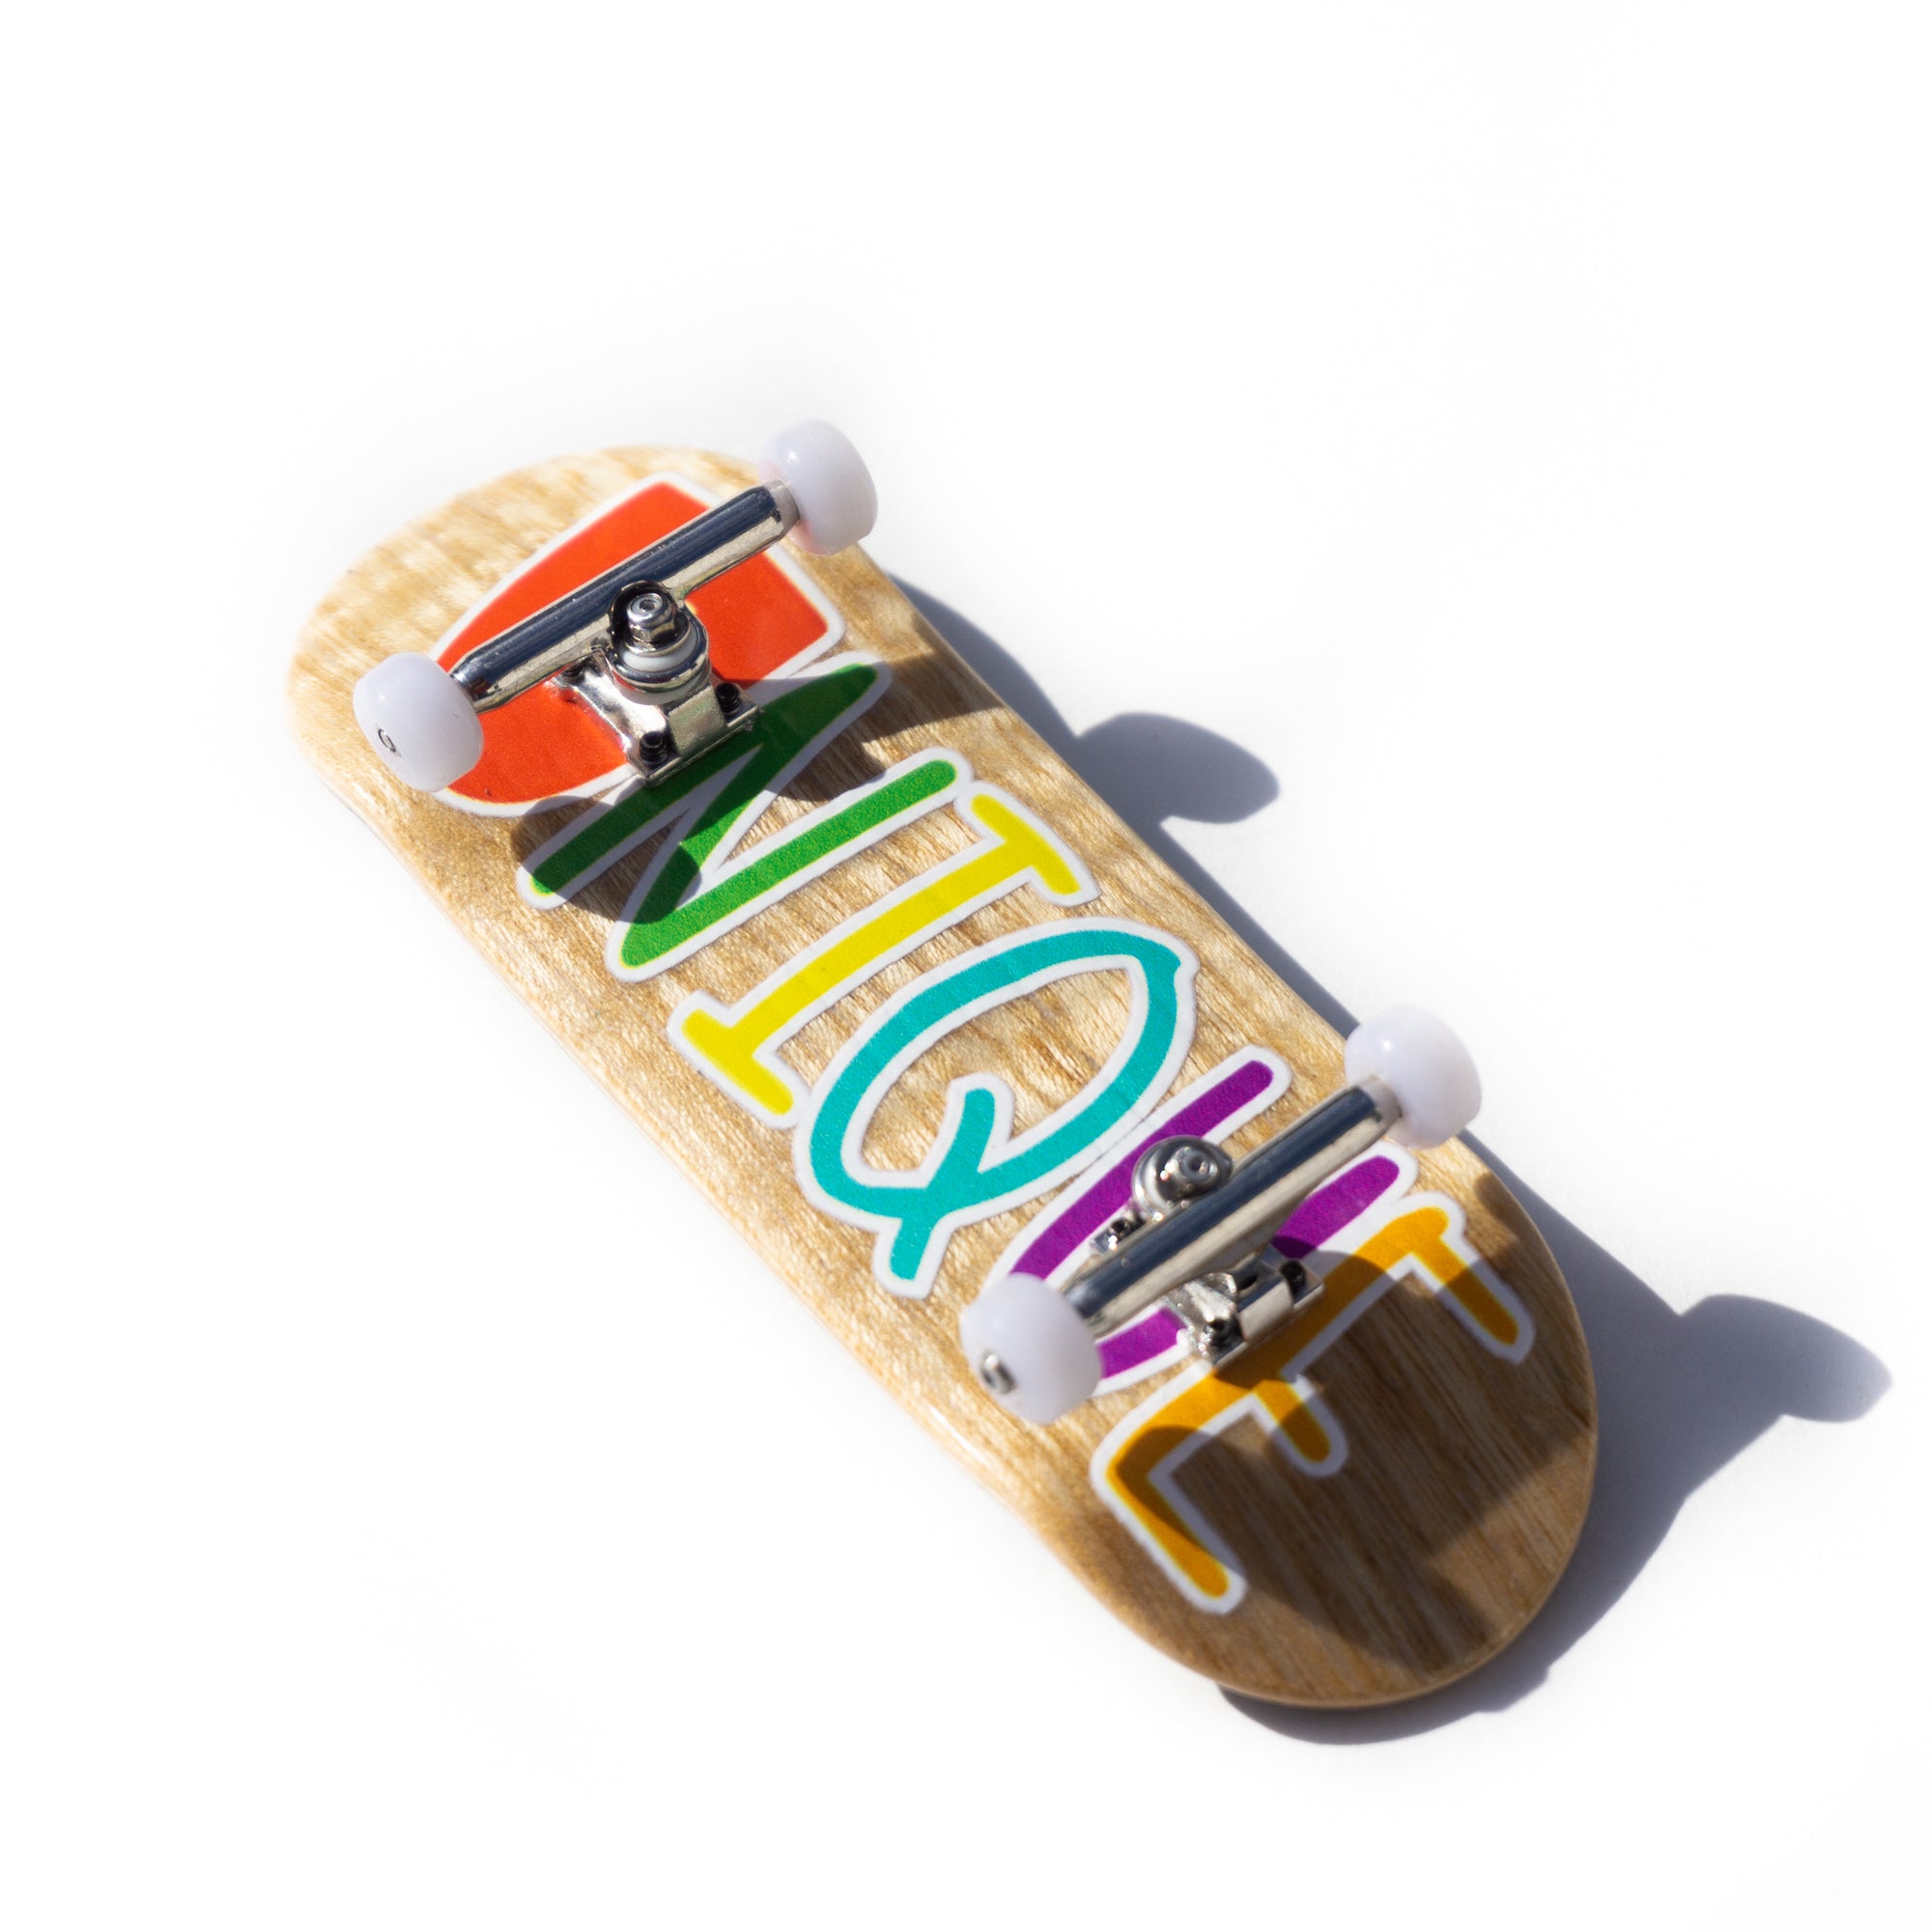 Professional, handcrafted fingerboards, ramps, and accessories ...